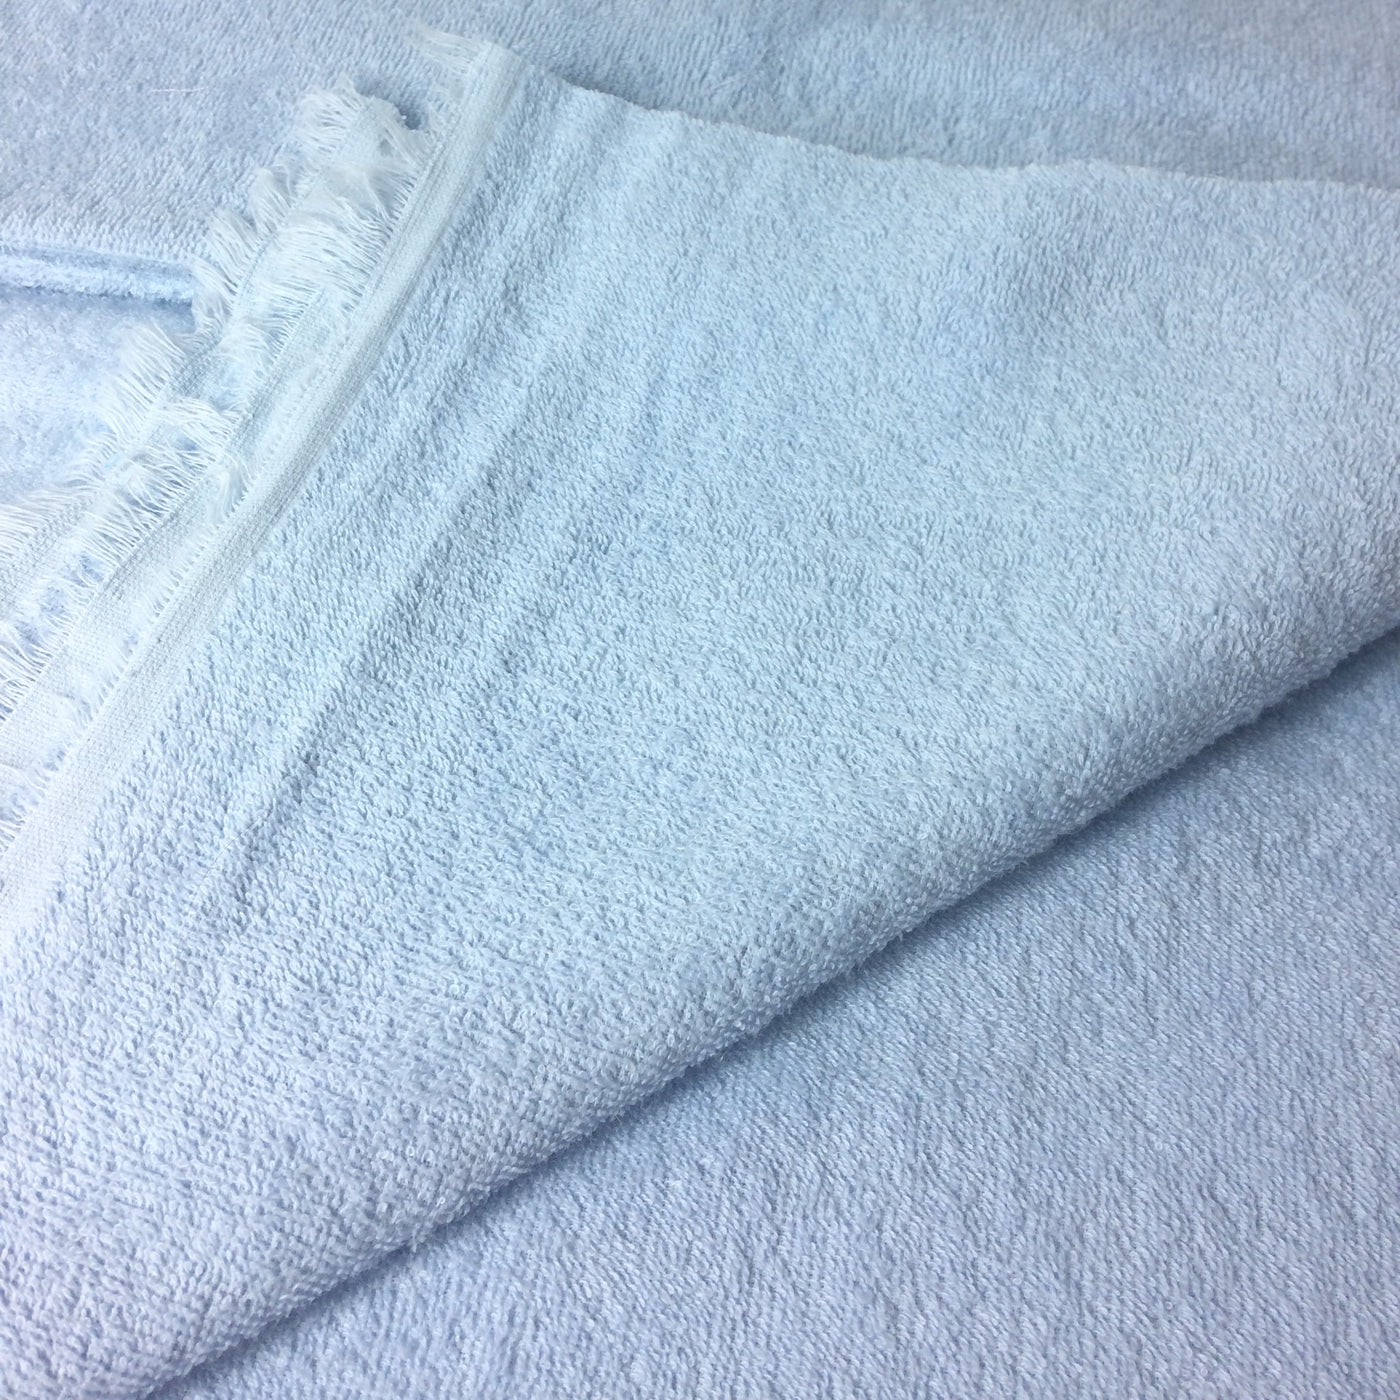 Blue terry toweling fabric 100% cotton 150cm wide